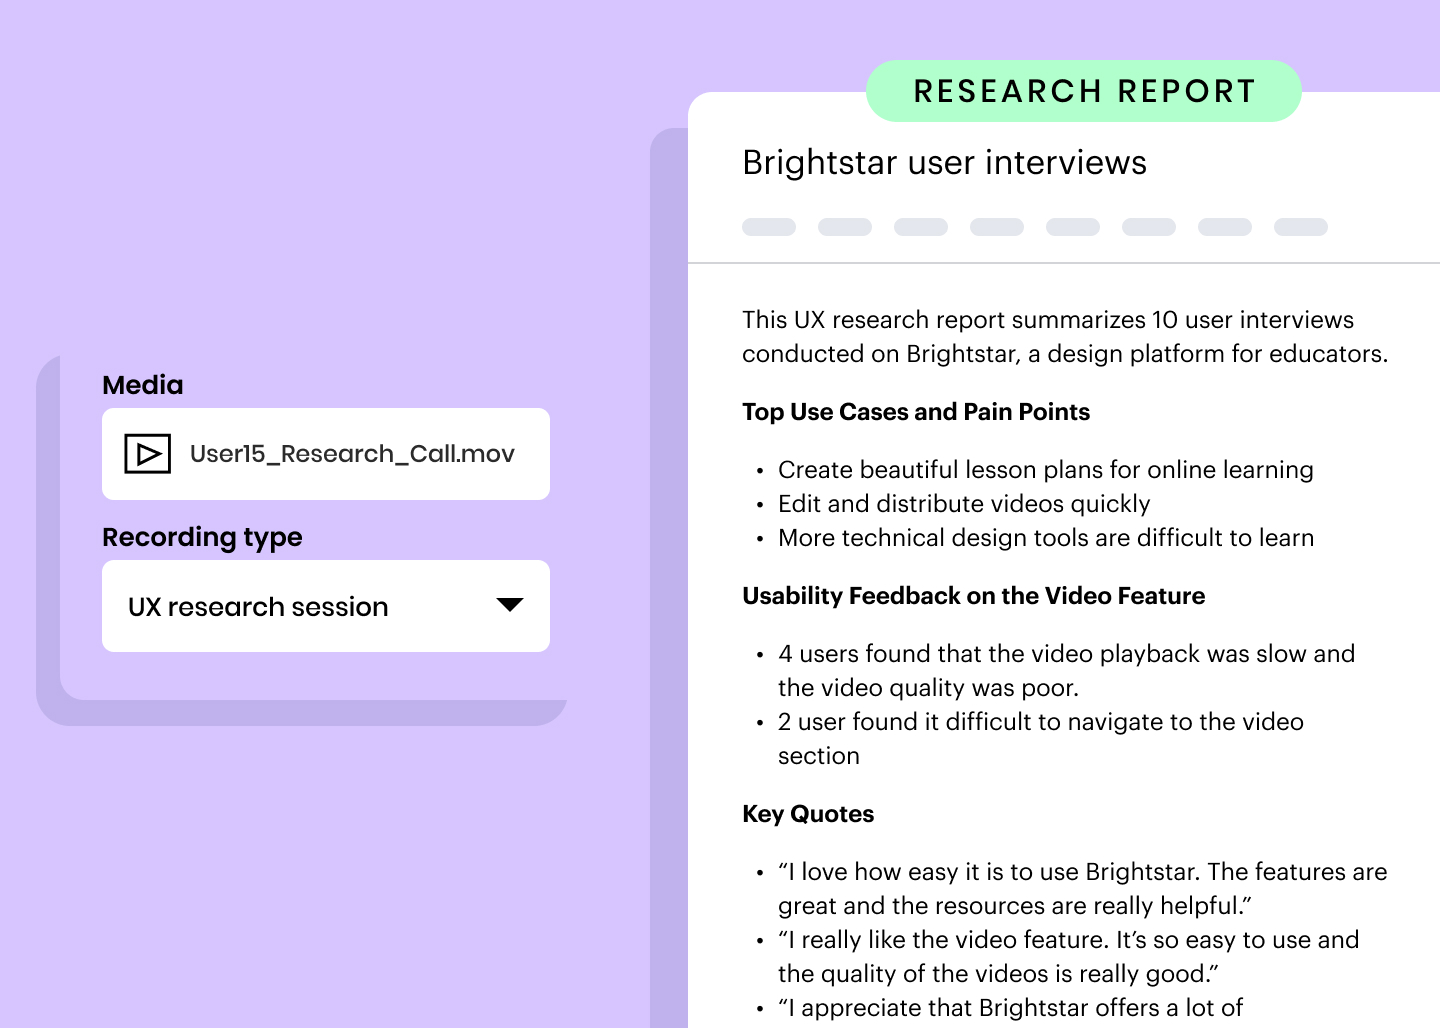 Research report example: This UX research report summarizes 10 user interviews conducted on Brightstar, a design platform for educators. Top Use Cases and Pain Points / Create beautiful lesson plans for online learning / Edit and distribute videos quickly / More technical design tools are difficult to learn. Usability Feedback on the Video Feature / 4 users found that the video playback was slow and the video quality was poor. / 2 user found it difficult to navigate to the video section. Key Quotes / “I love how easy it is to use Brightstar. The features are great and the resources are really helpful.” / “I really like the video feature. It’s so easy to use and the quality of the videos is really good.” / “I appreciate that Brightstar offers a lot of...